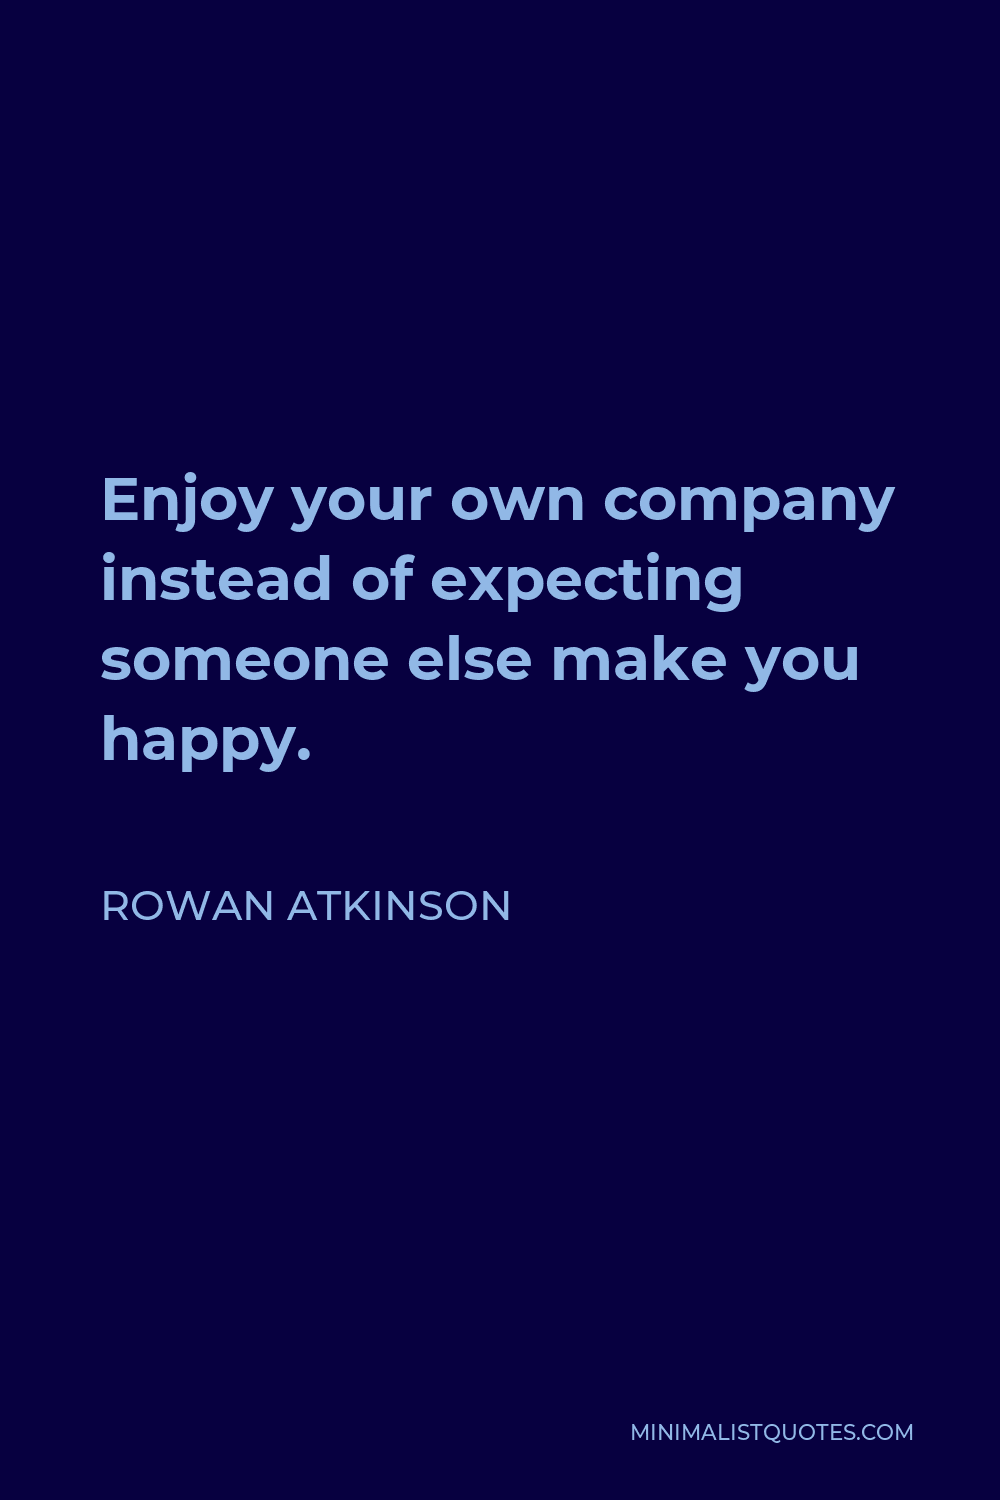 Rowan Atkinson Quote - Enjoy your own company instead of expecting someone else make you happy.